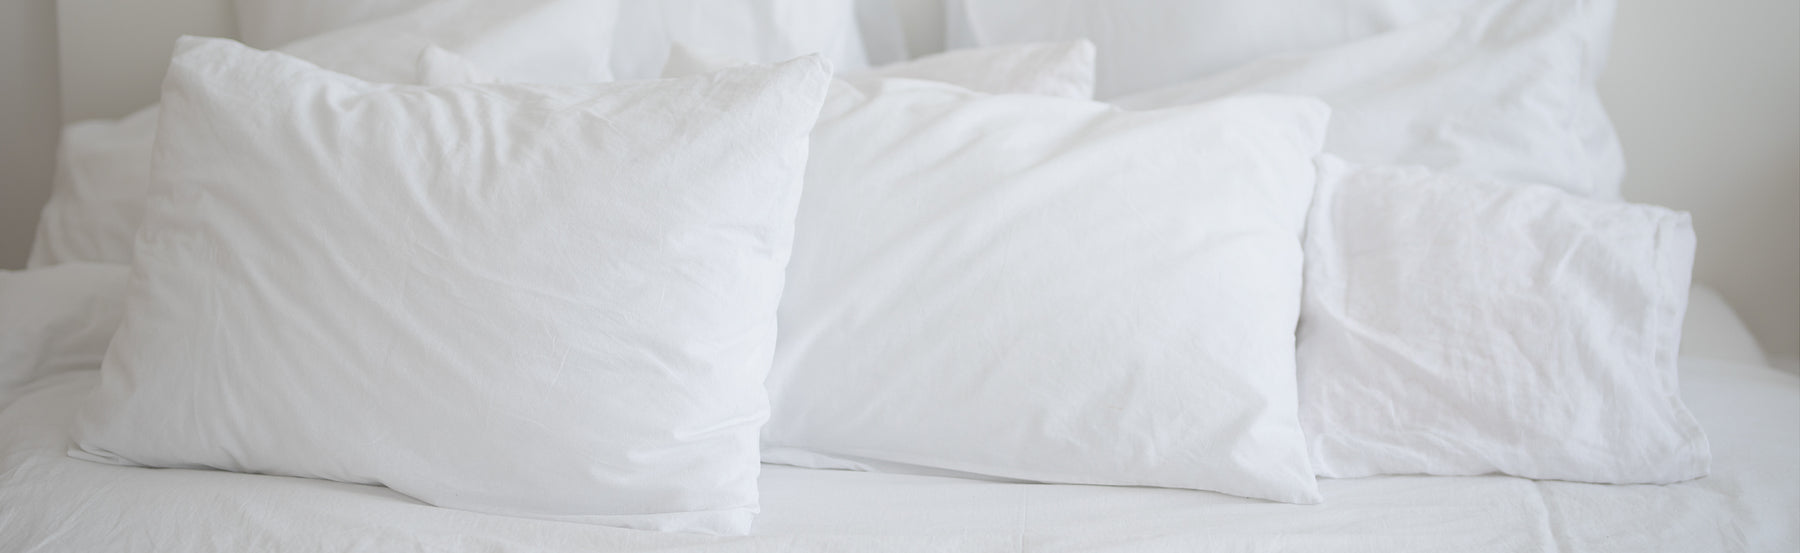 Proper Pillows for Sleeping in Different Positions: Part One, Knowing the Different Types of Pillows